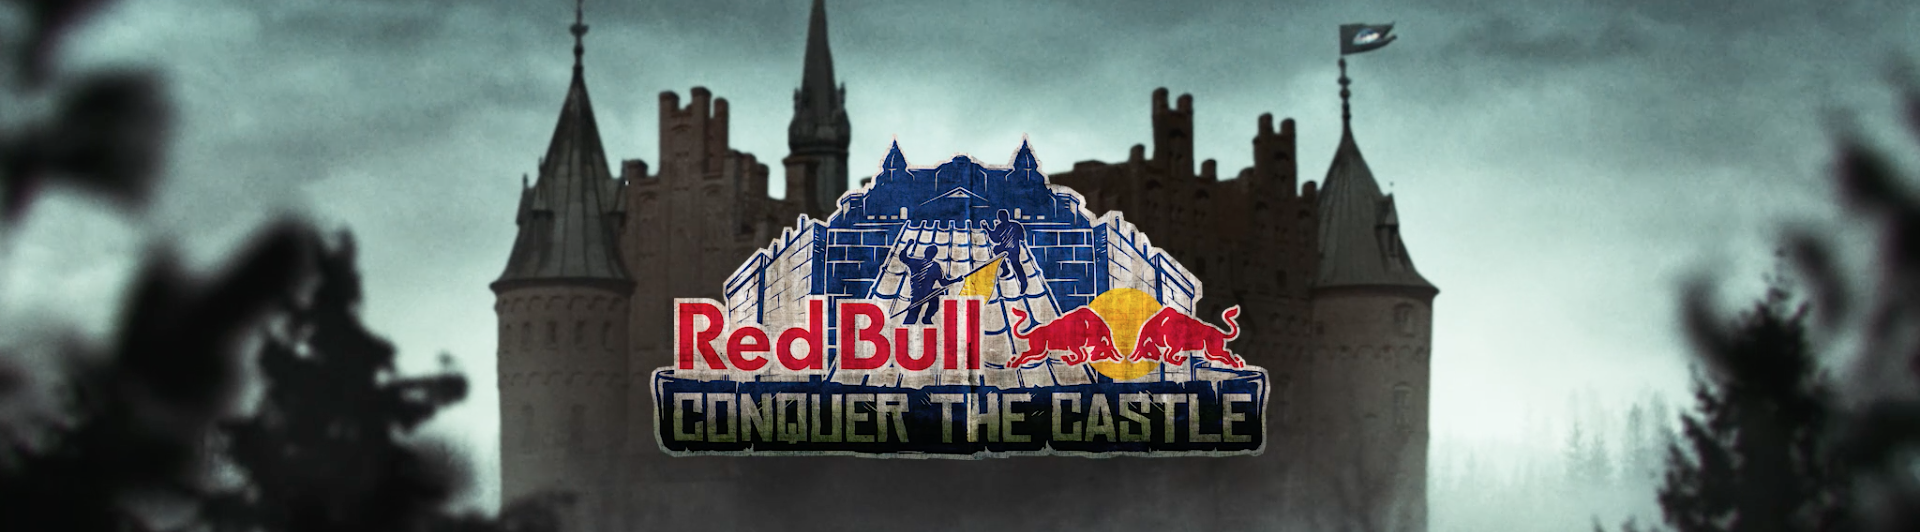 Red Bull Conquer The Castle